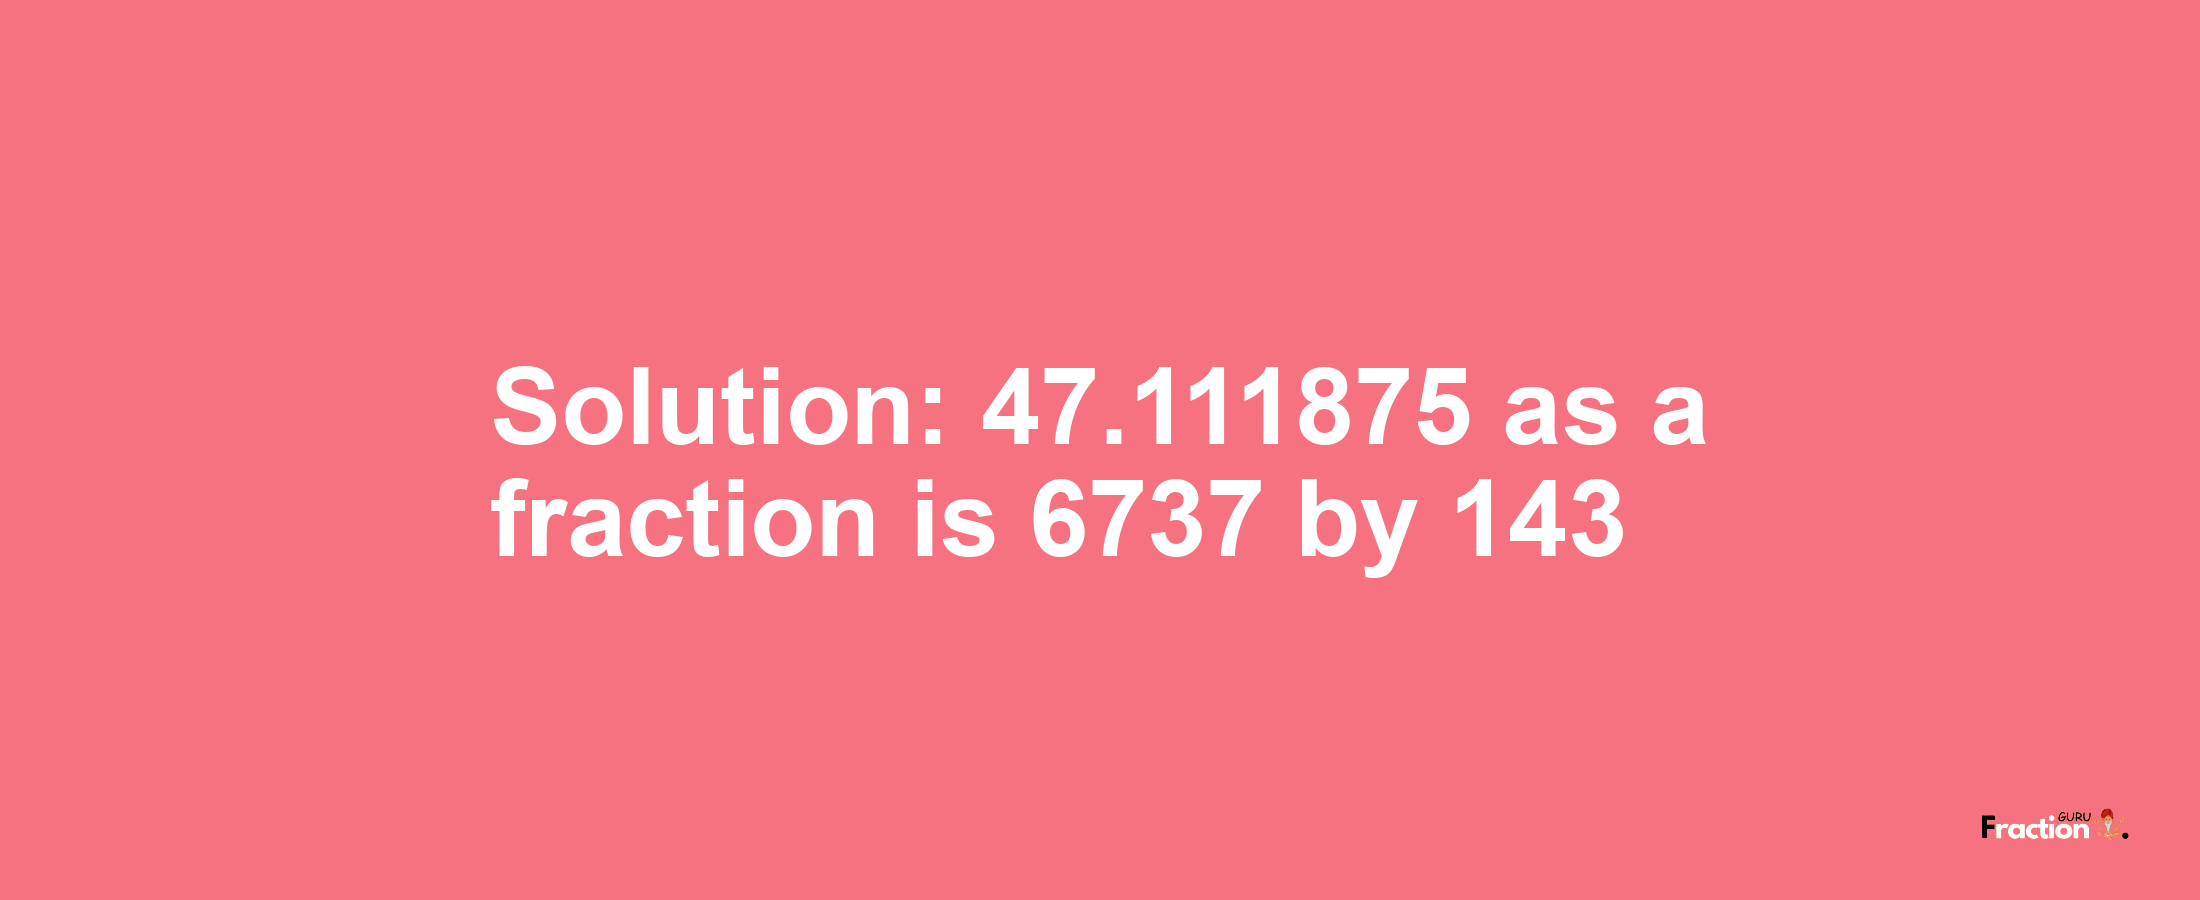 Solution:47.111875 as a fraction is 6737/143